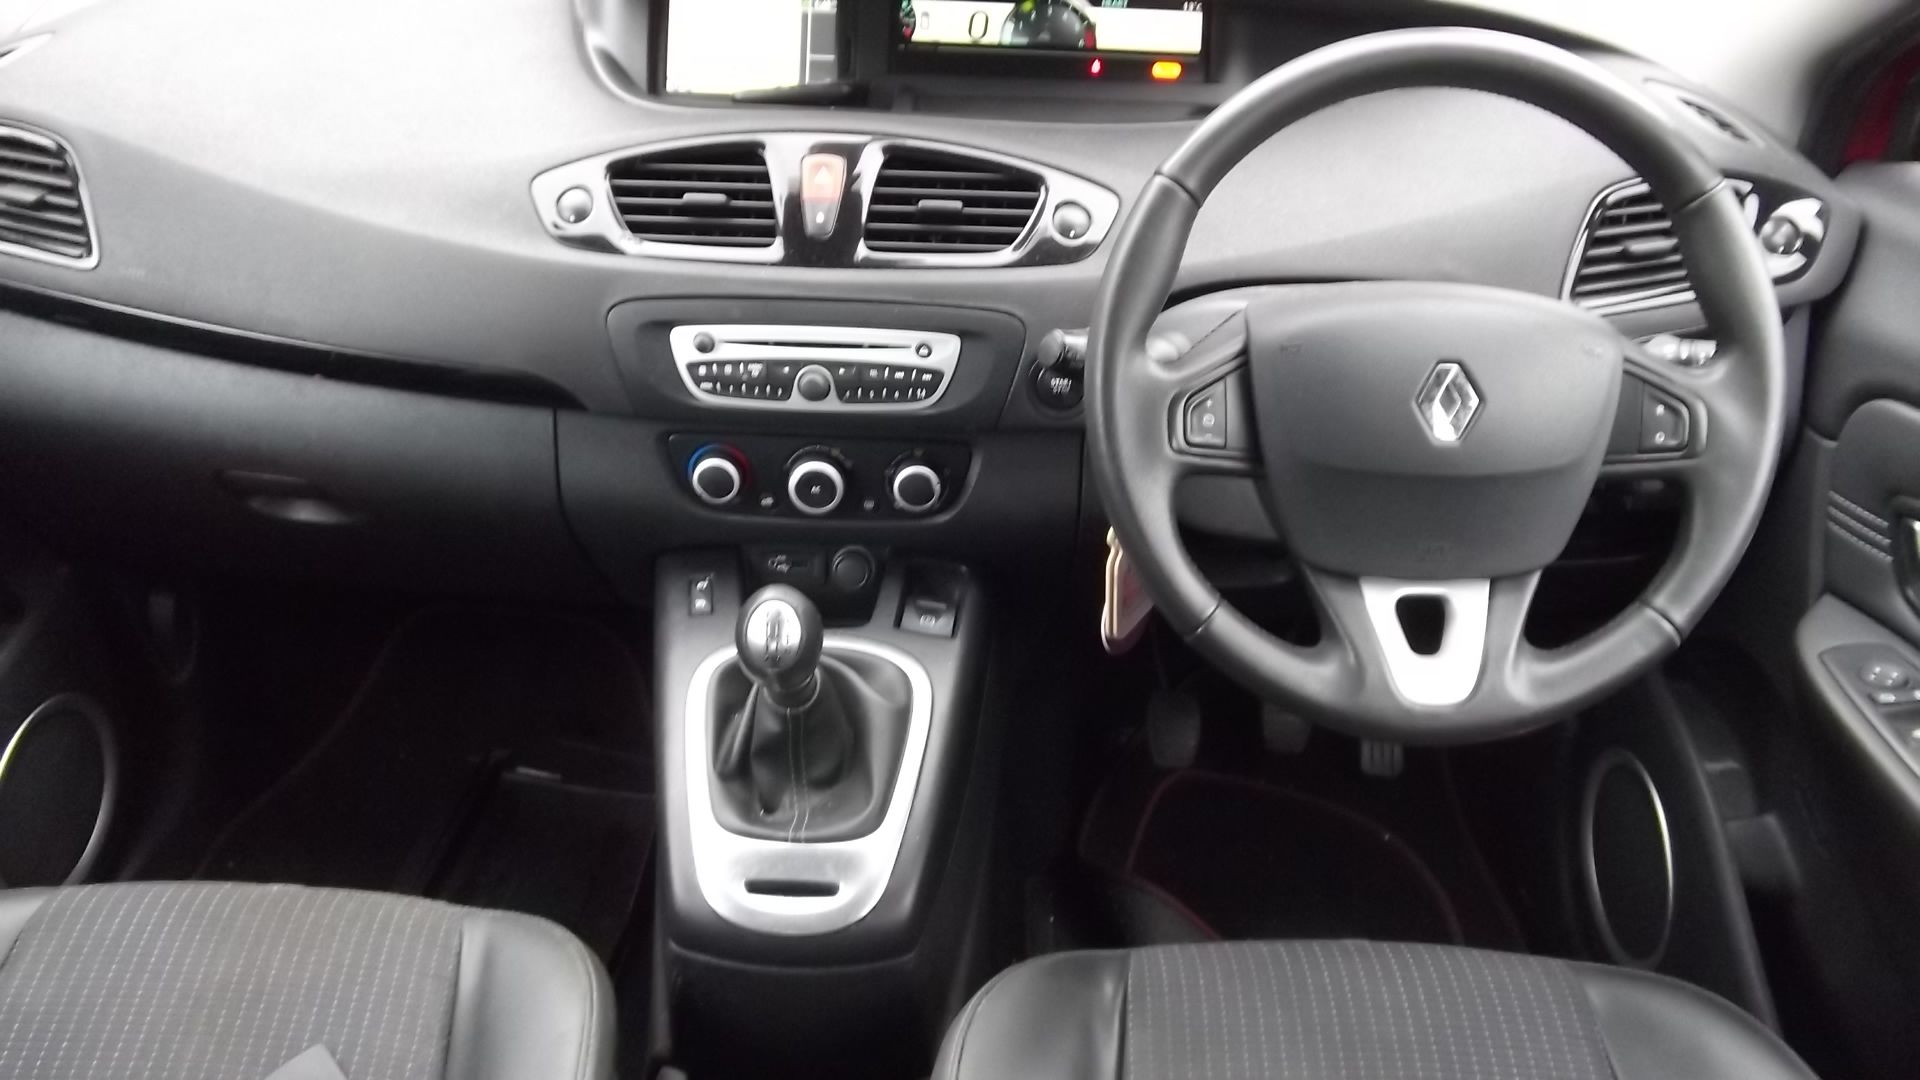 2011 Renault Scenic 1.5 DCI Dynamique Tom Tom 5 Door MPV - Image 2 of 17